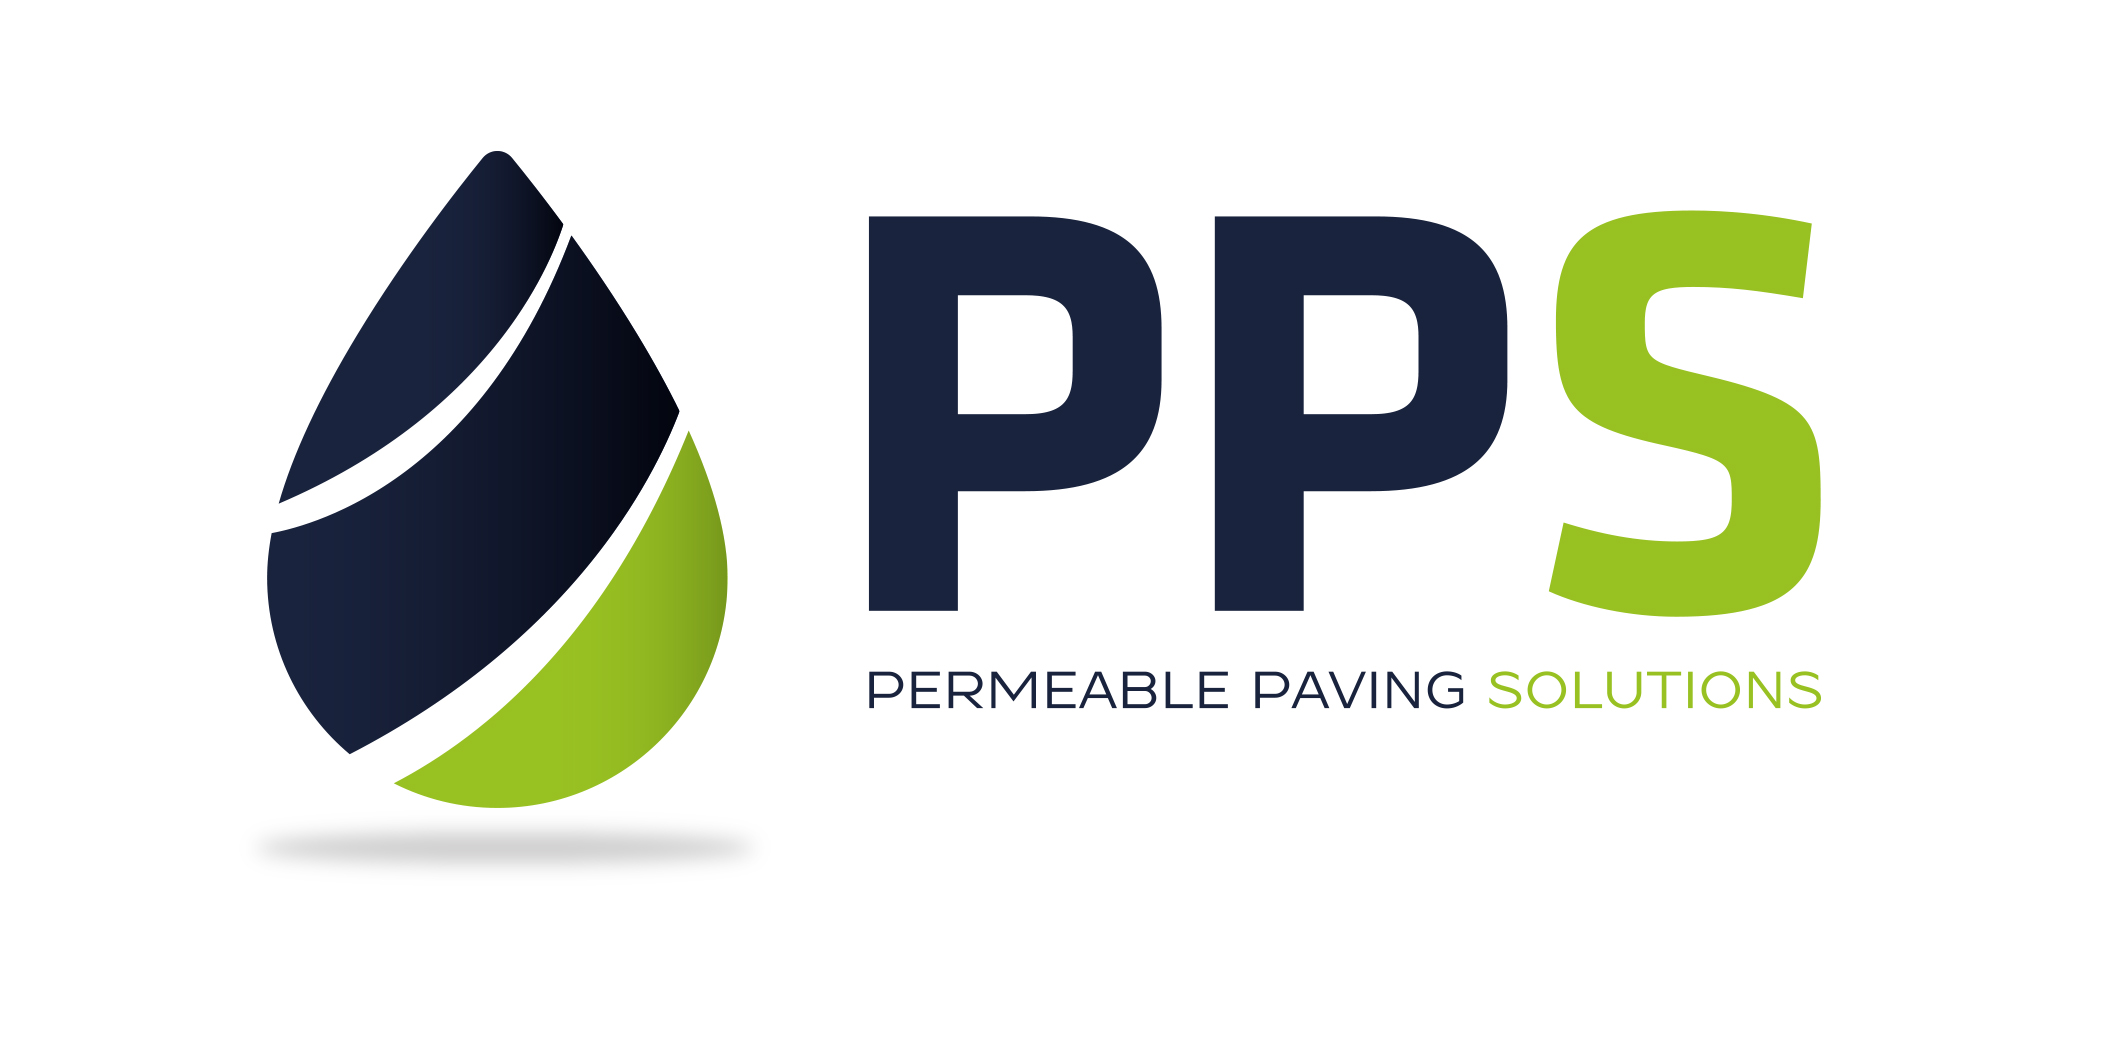 Permeable Paving Solutions